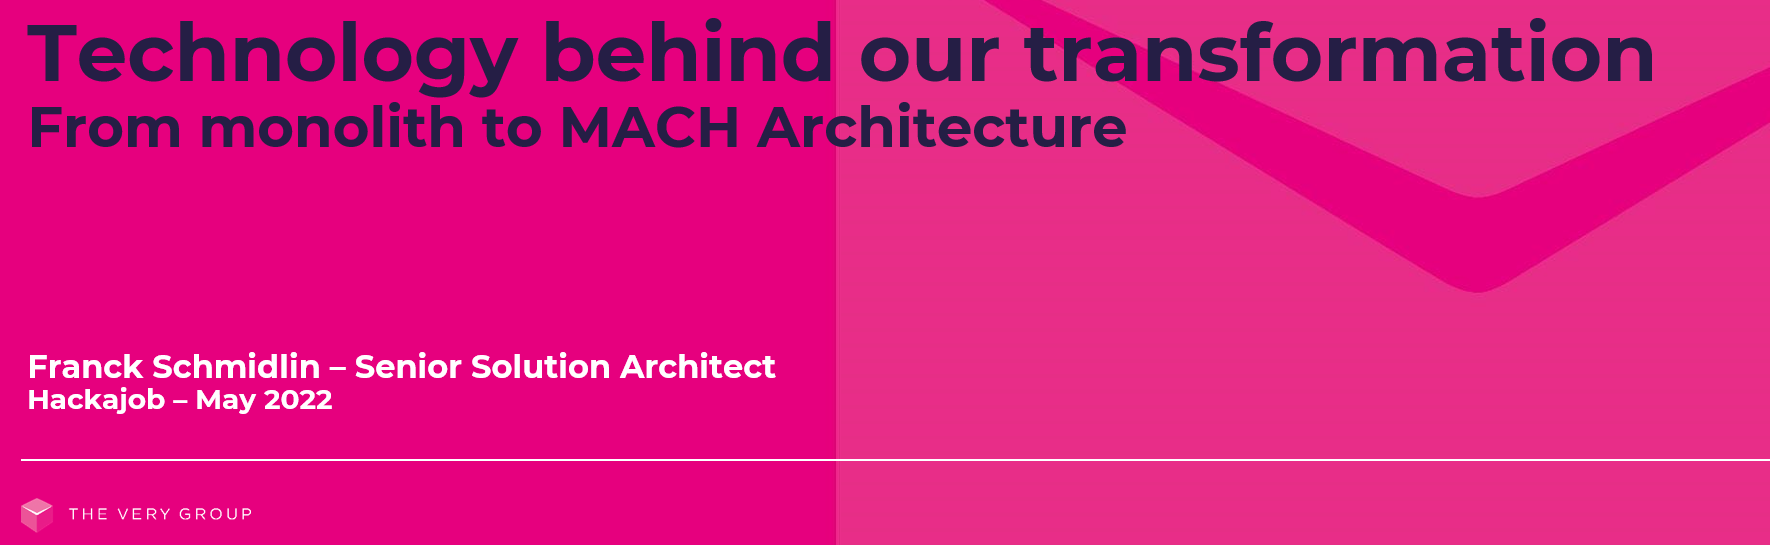 From monolithic to MACH architecture